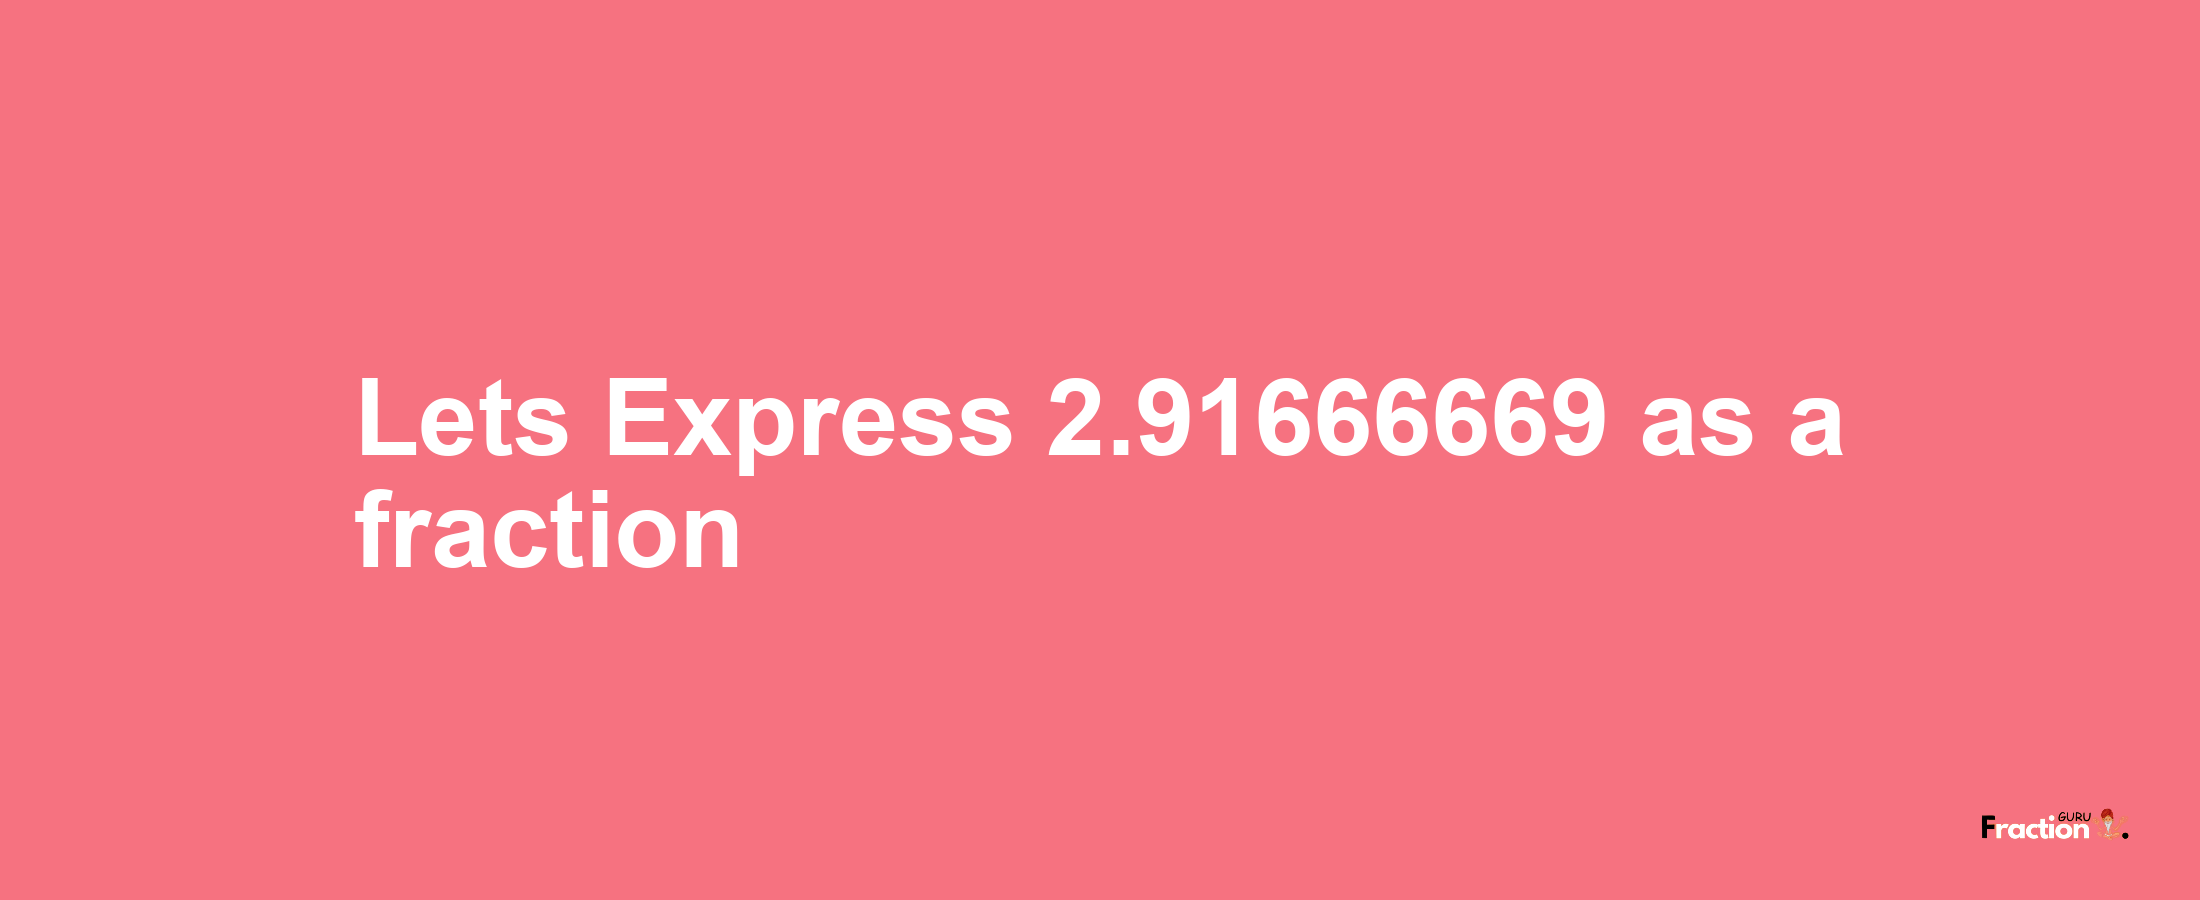 Lets Express 2.91666669 as afraction